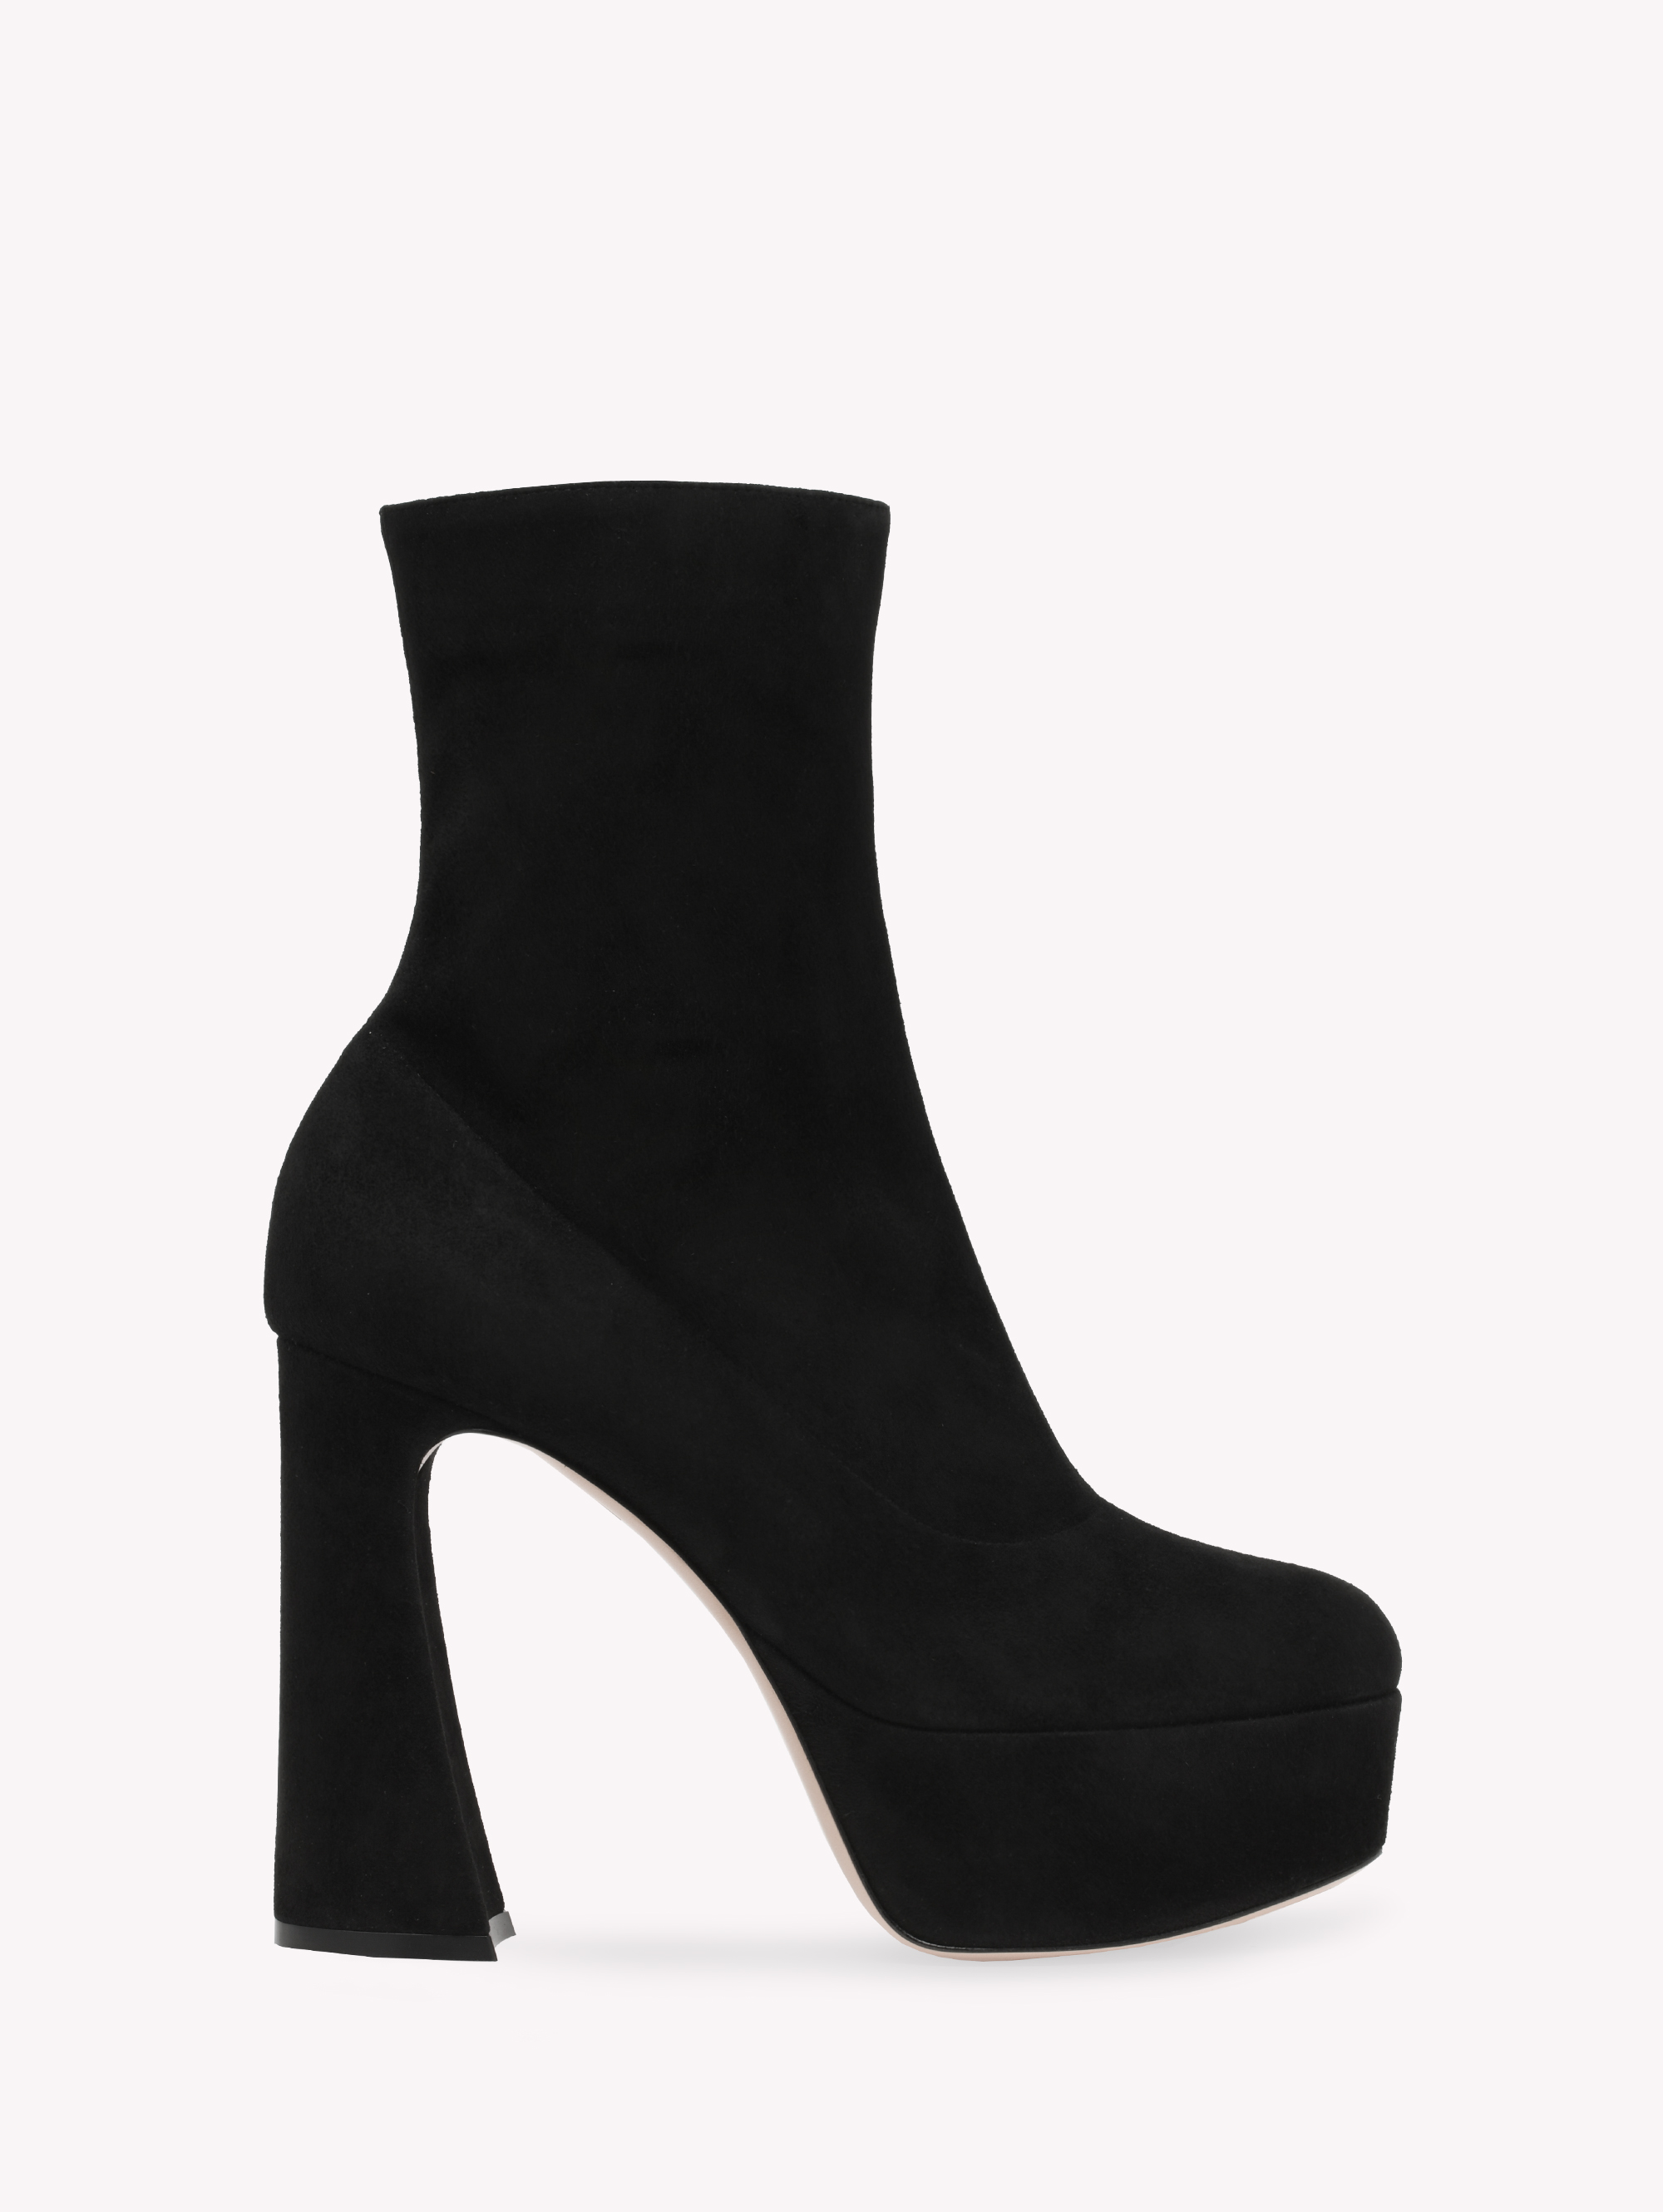 Ankle Boots for Women HOLLY BOOTIE | Gianvito Rossi